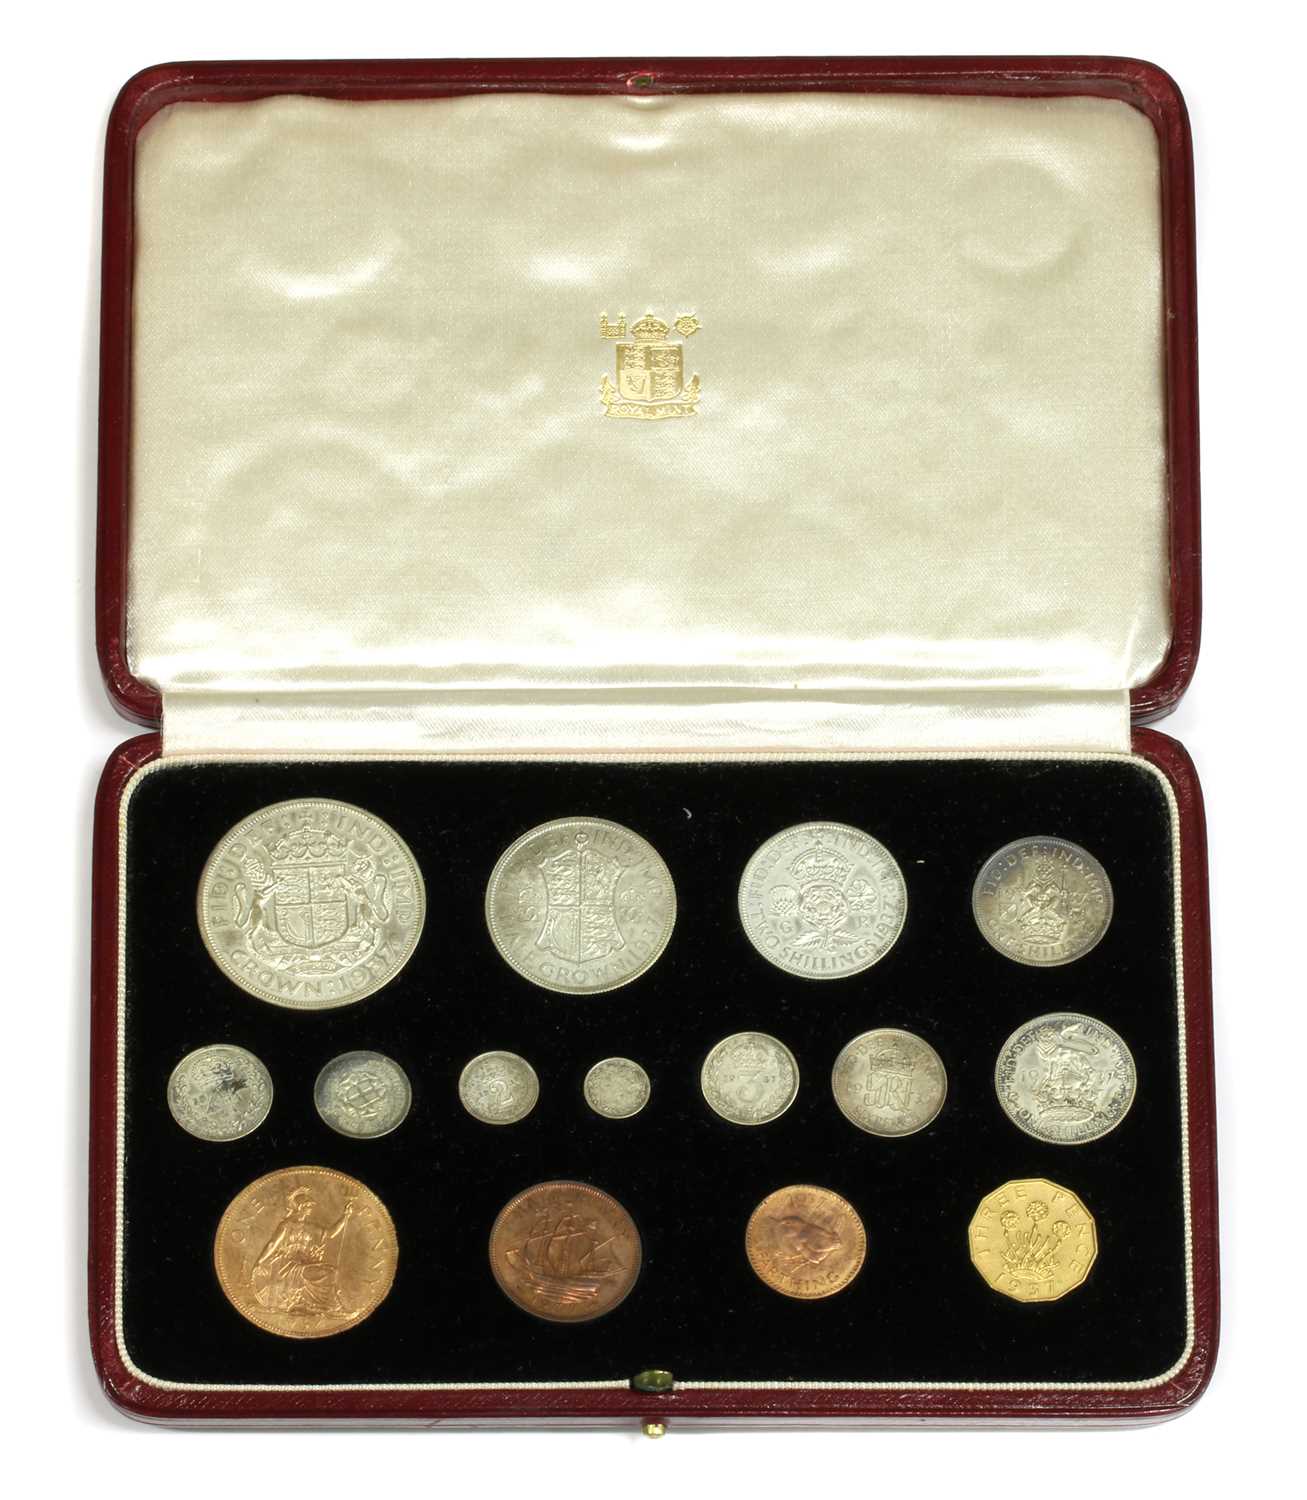 Coins, Great Britain, George VI (1936-1952), - Image 2 of 2